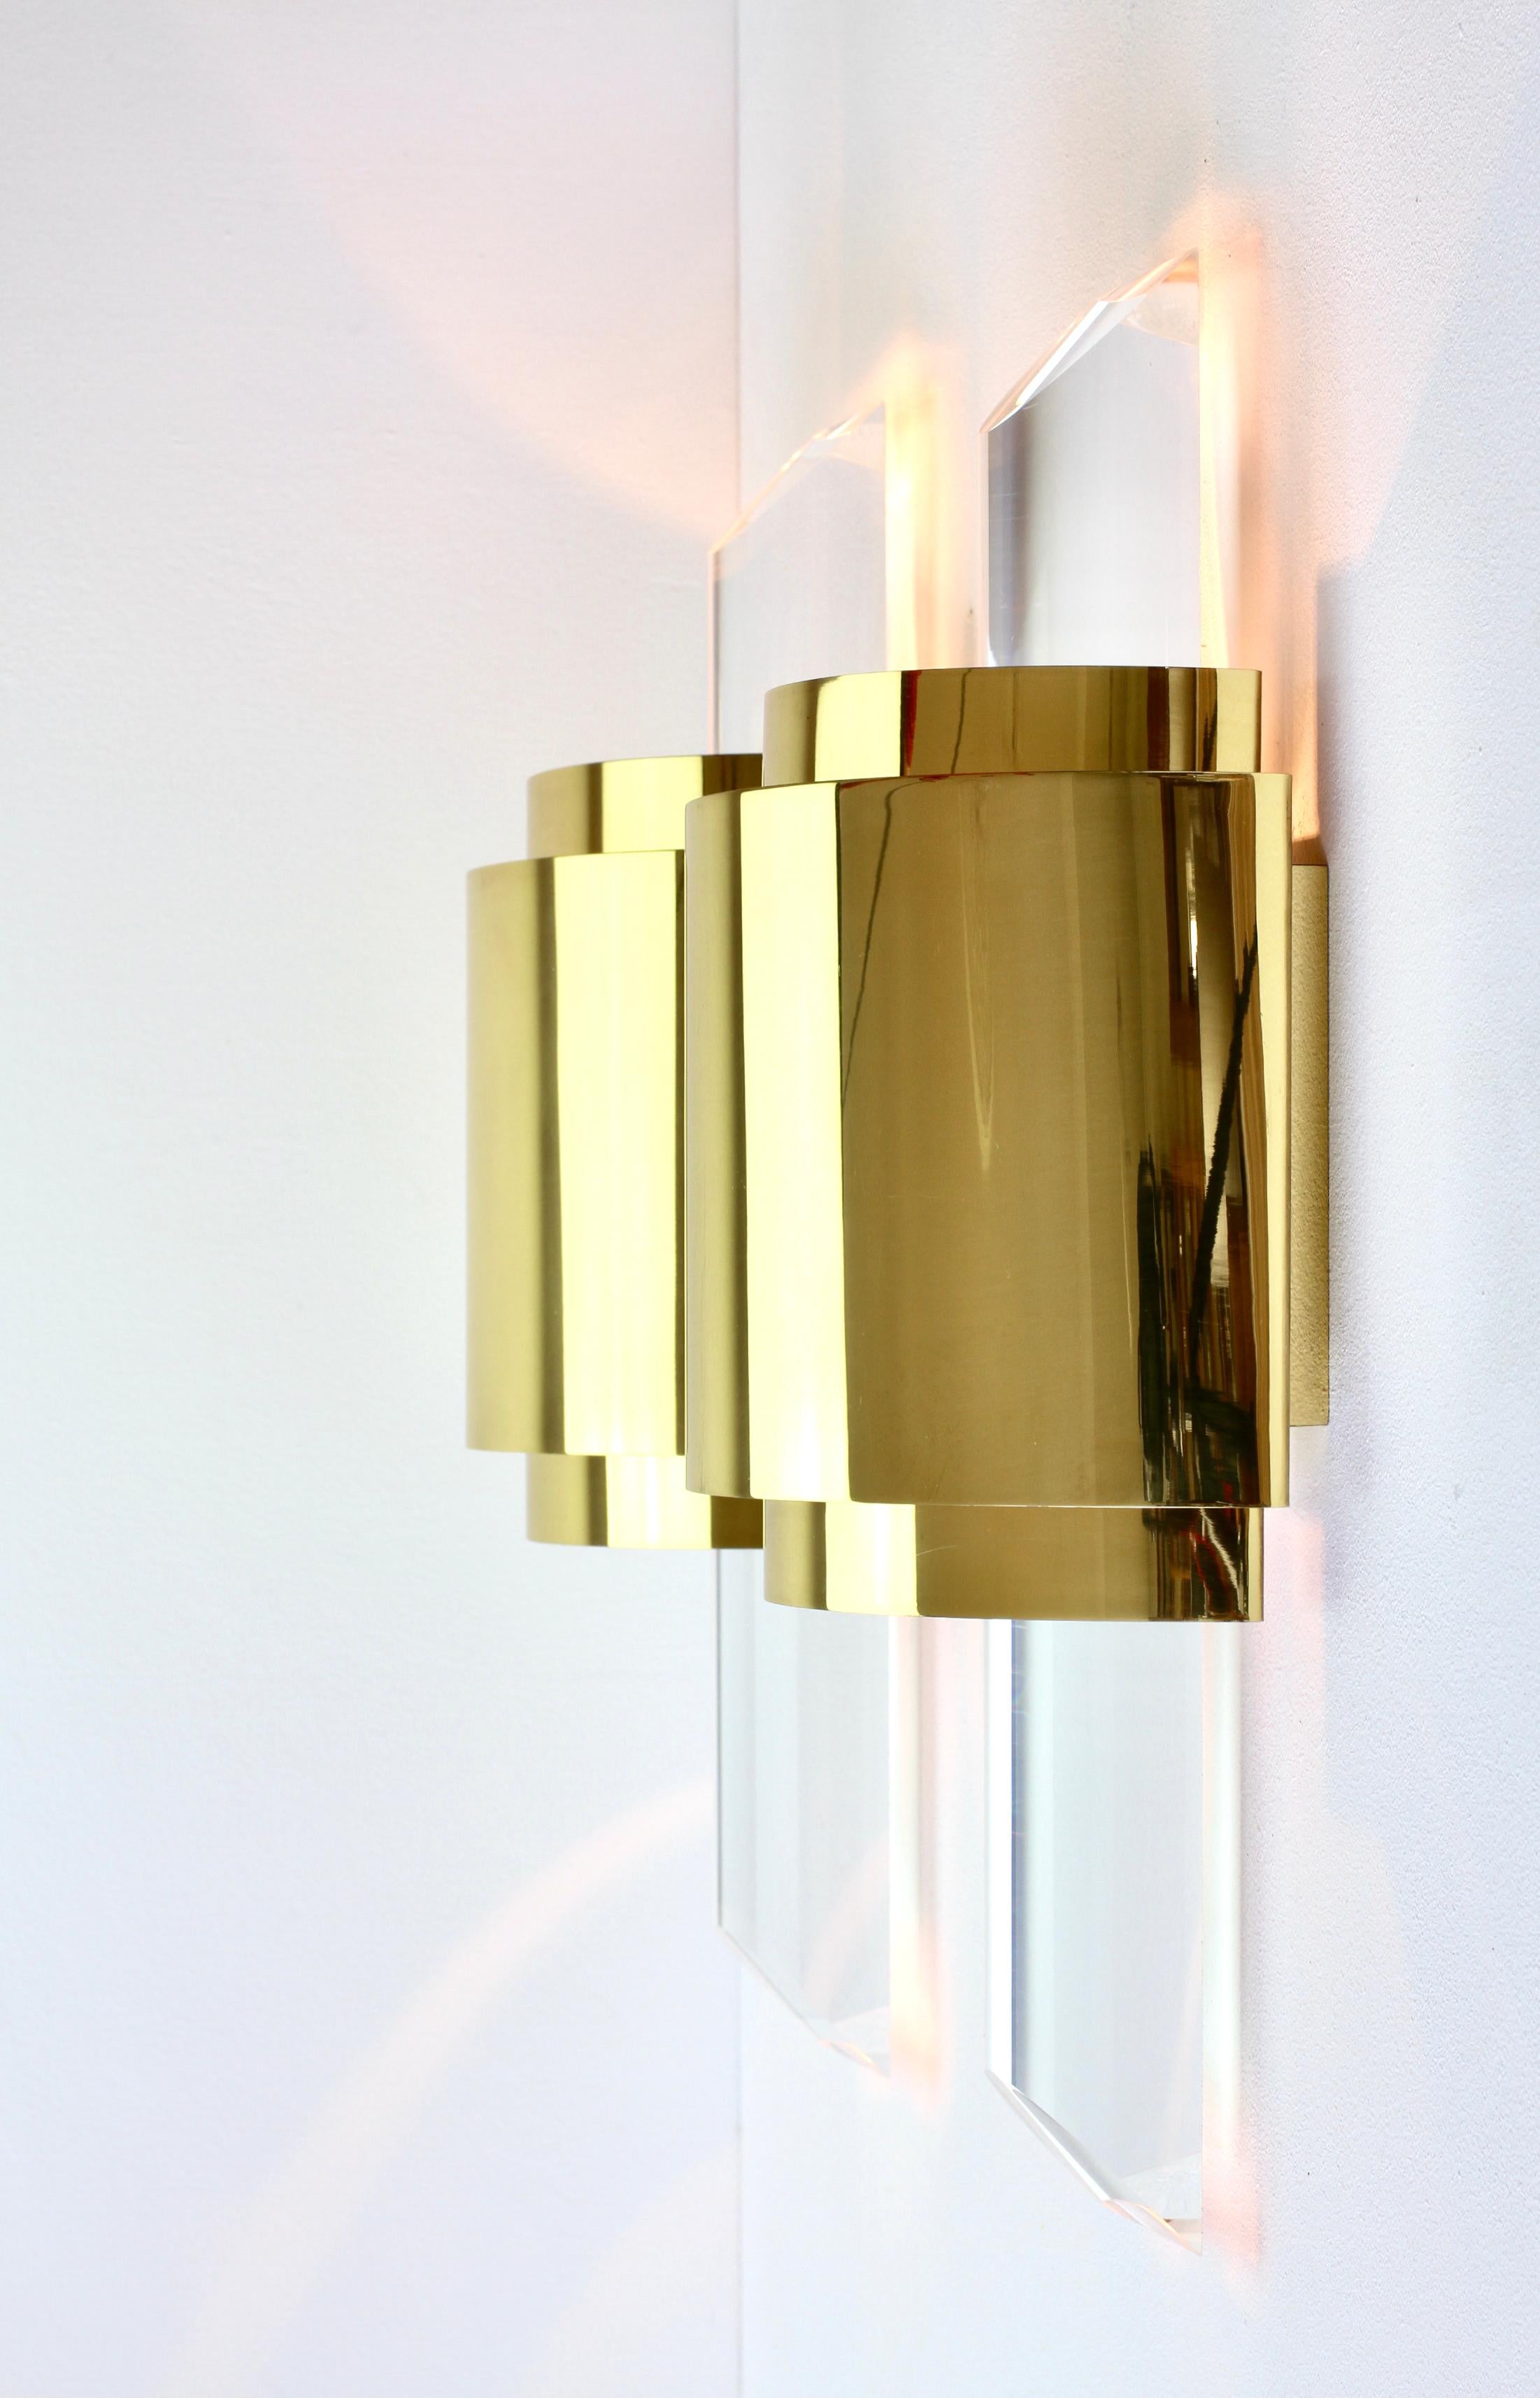 Large Hollywood Regency Lucite and Brass Wall Lights or Sconces, circa 1970s For Sale 1